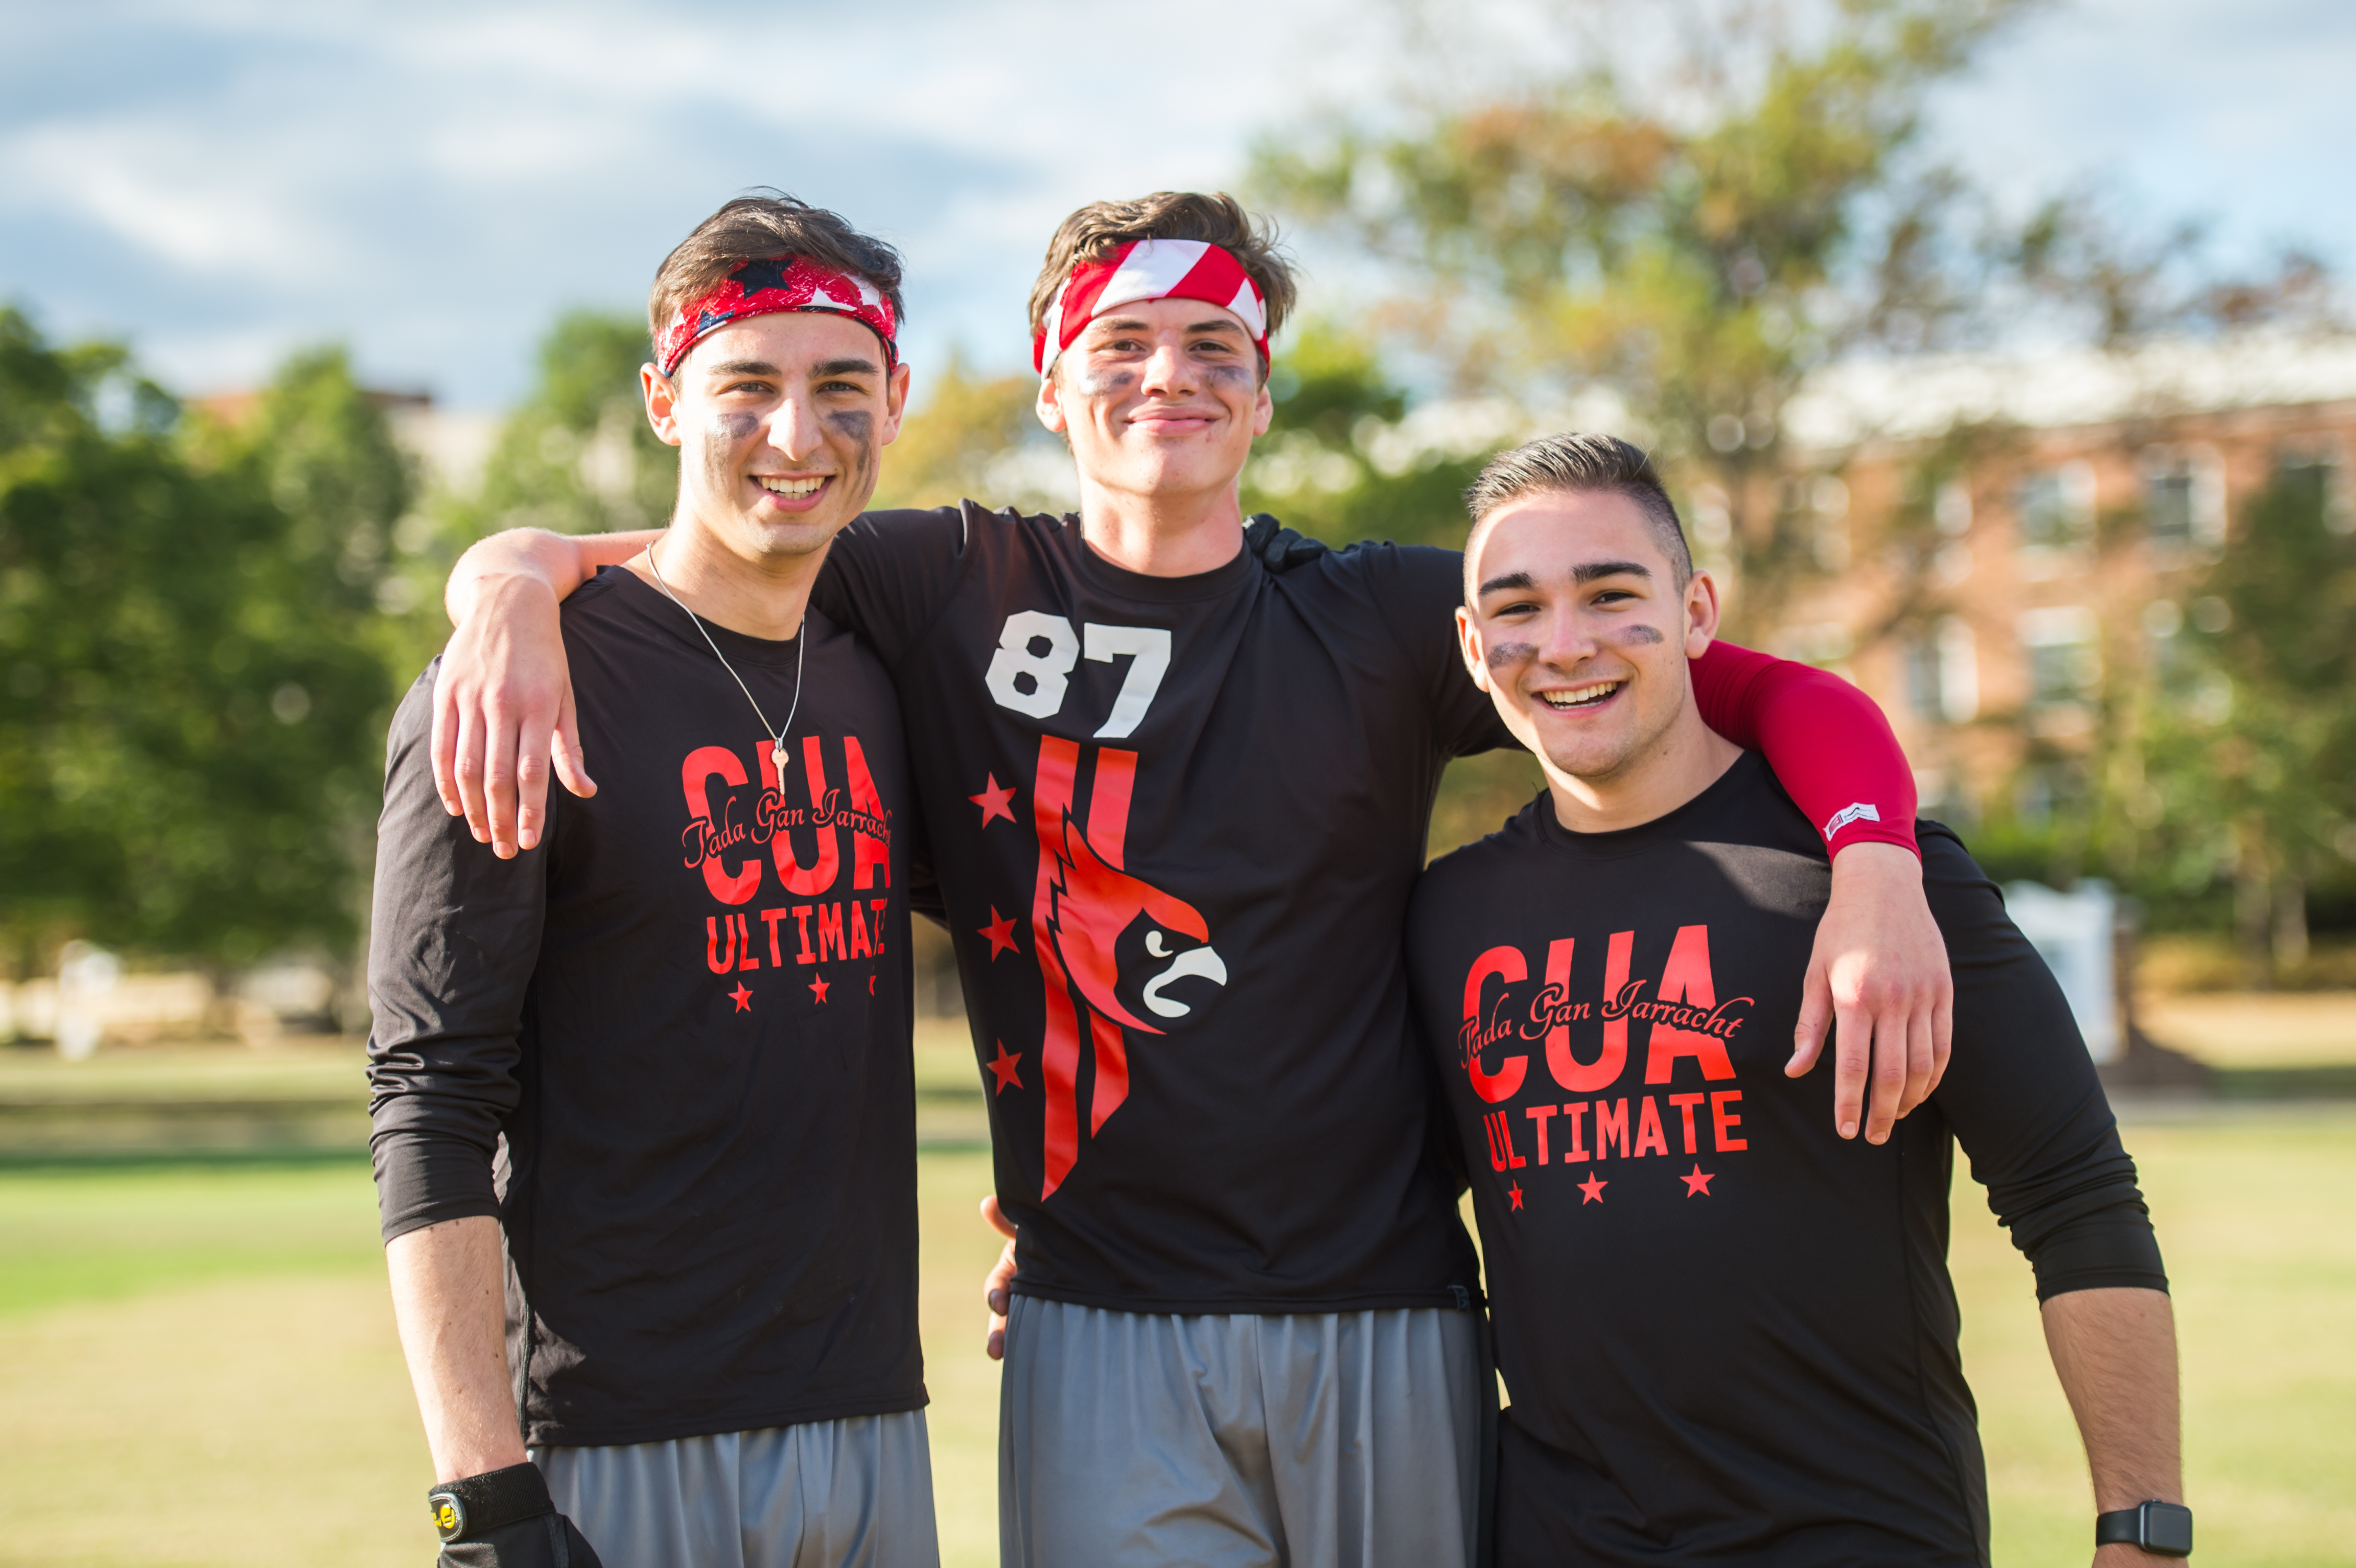 Photo of the men’s Ultimate team at a tournament in 2019, taken by Arreaga during his internship with University Communications. 